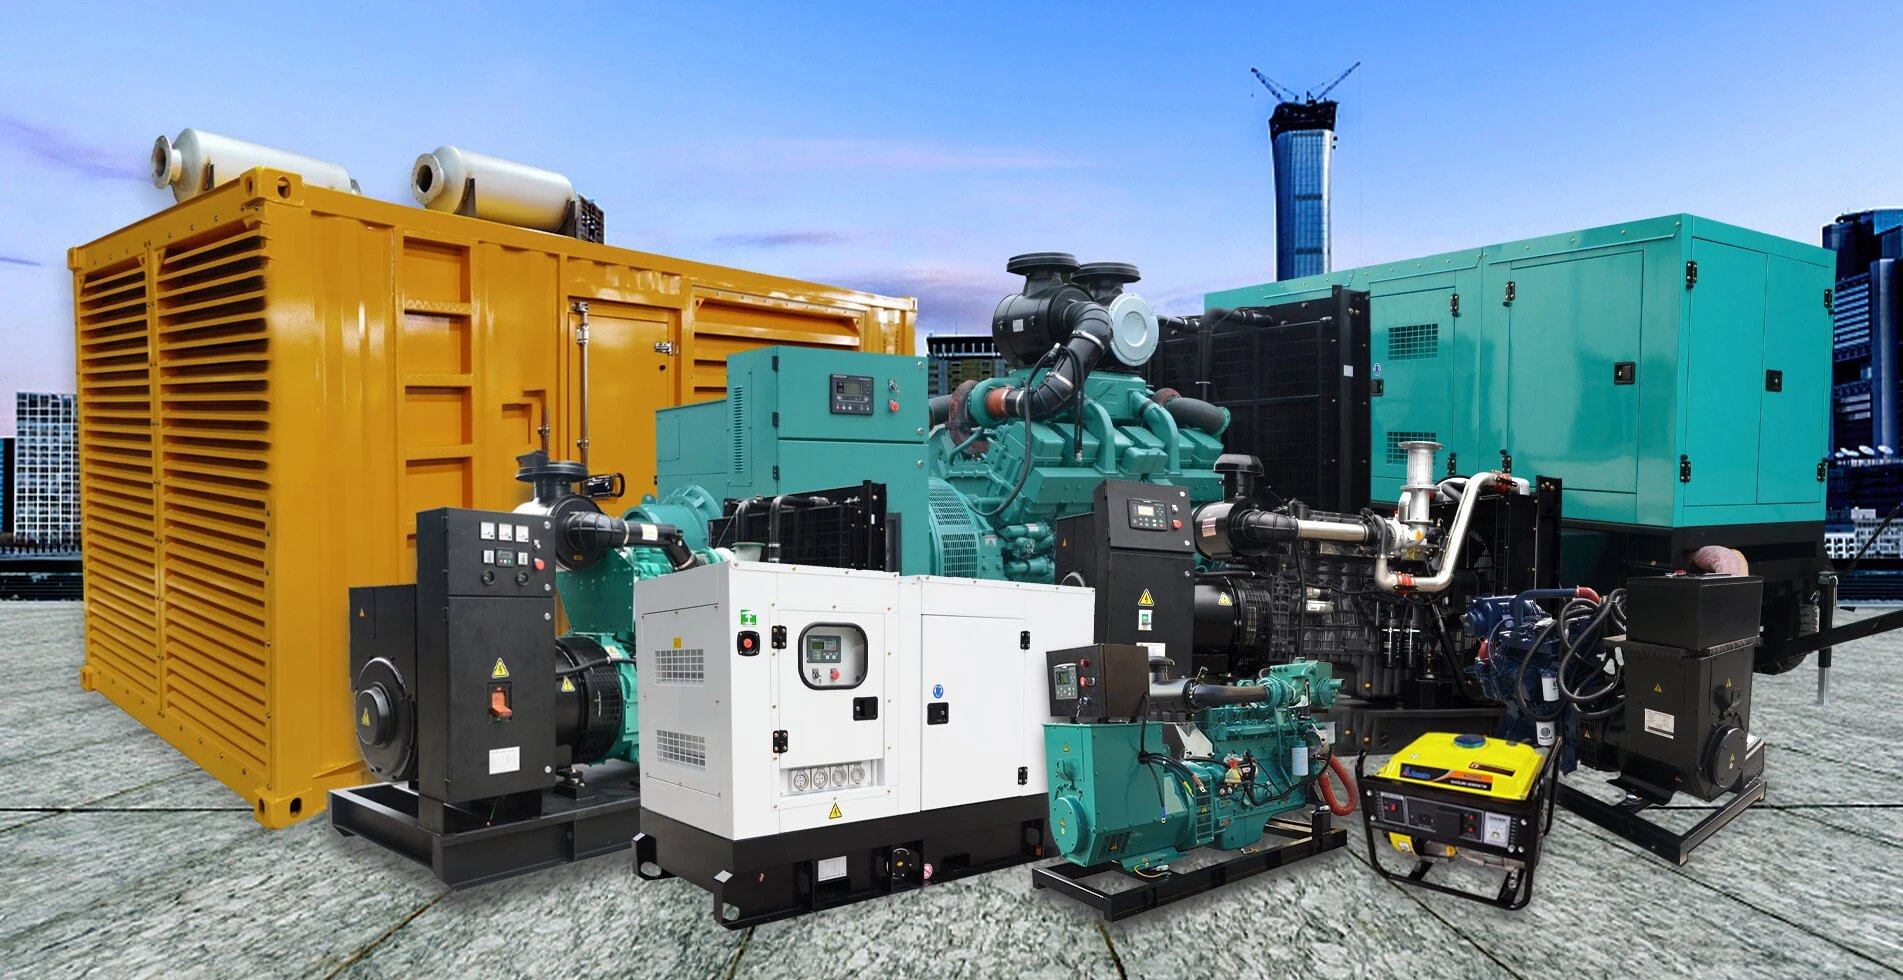 Genset Generator Products Dispaly